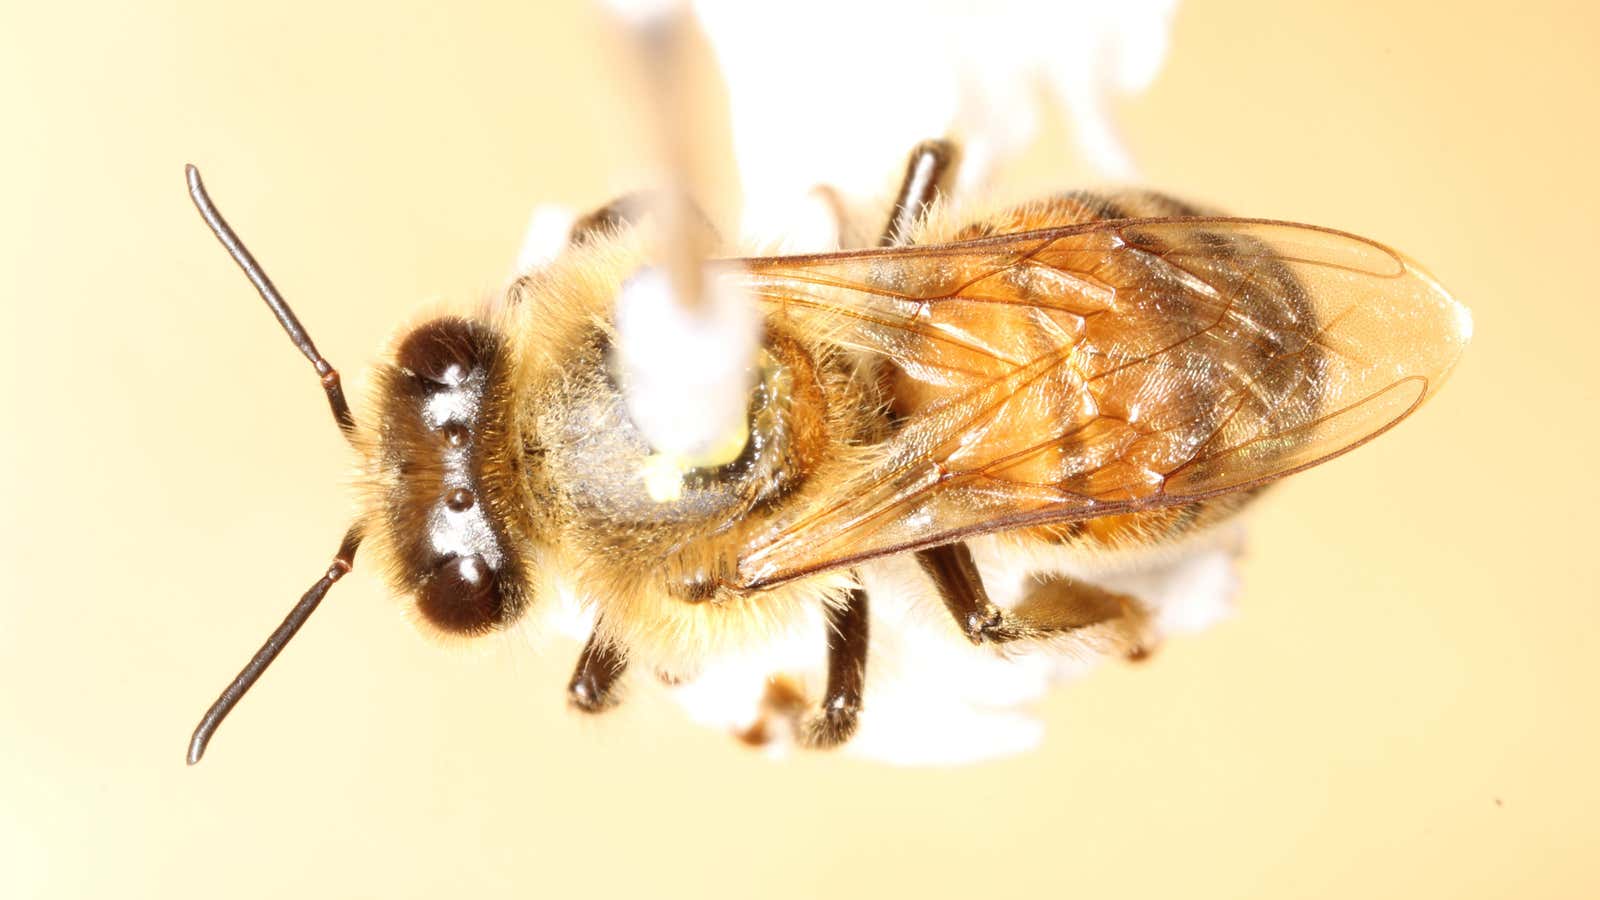 To measure the bees’ flight behavior, the scientists mounted harnesses to their backs